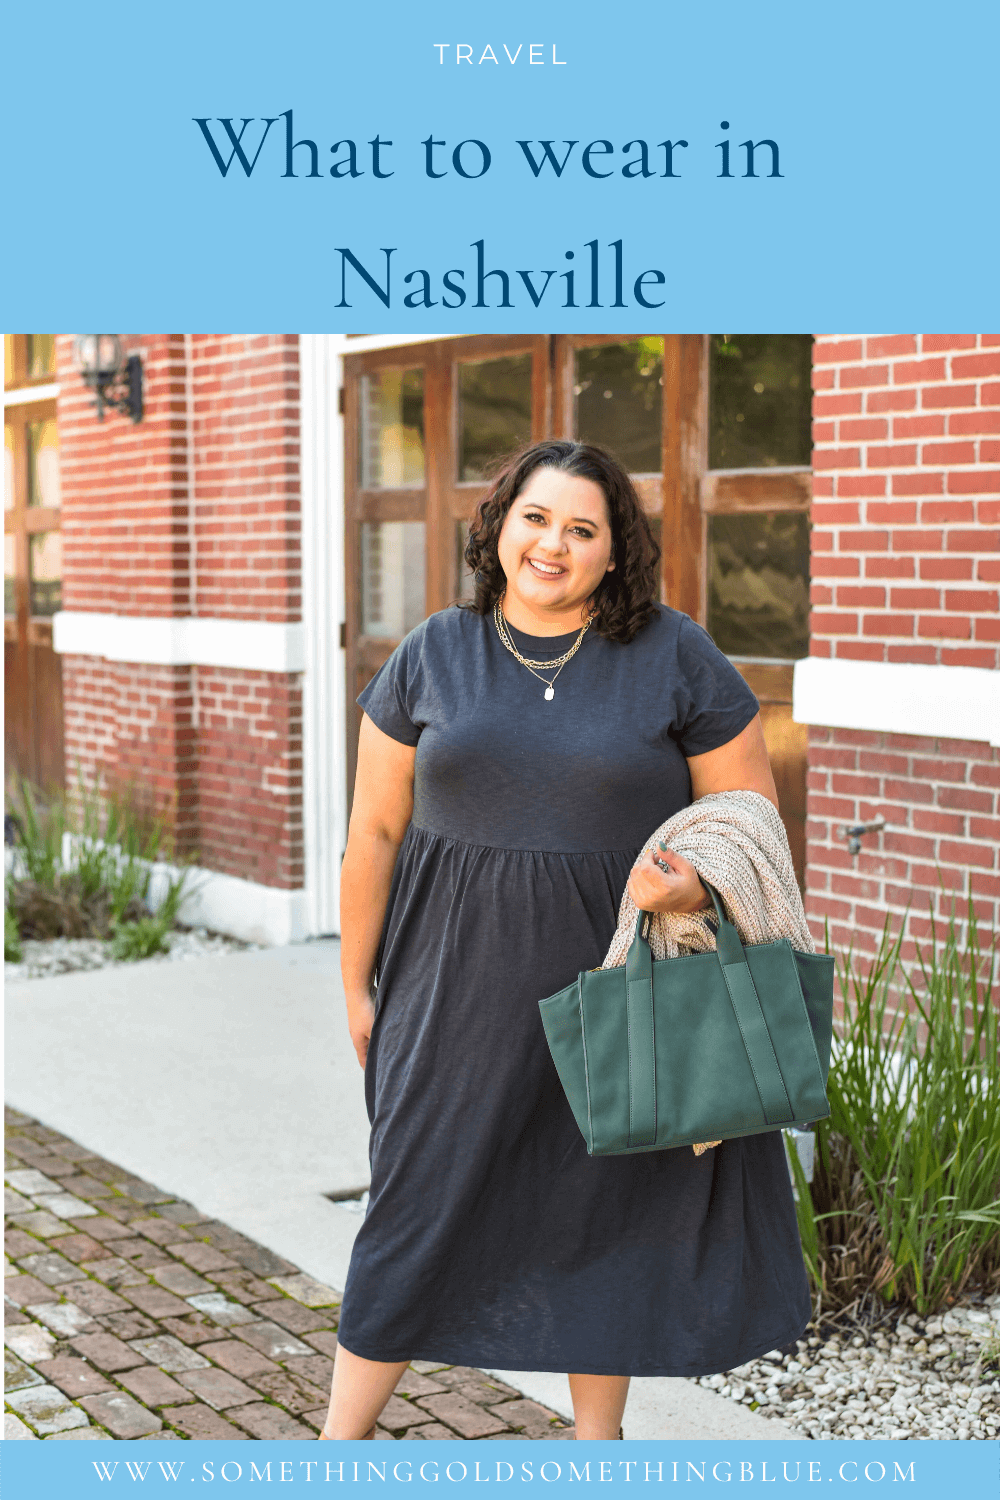 It's always tough to decide what to pack for a trip to a new city. This post shares what to consider when packing for a trip to Nashville, Tennessee with a few of my favorite plus size options that I wore on a recent fall trip to Music City.